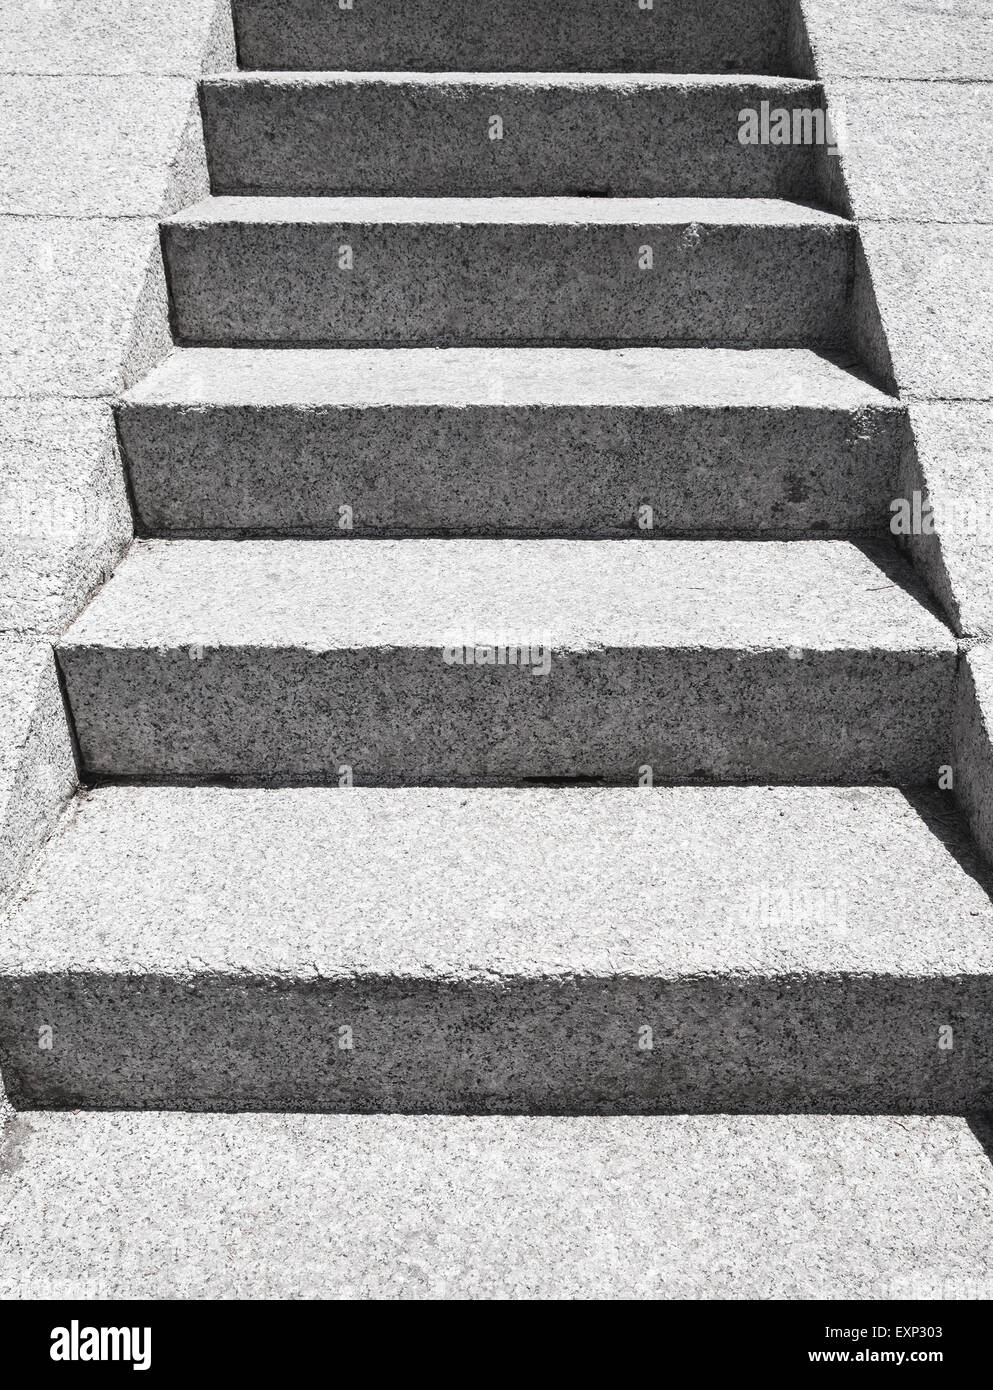 Stairs made of gray granite stone goes up, perspective view Stock Photo